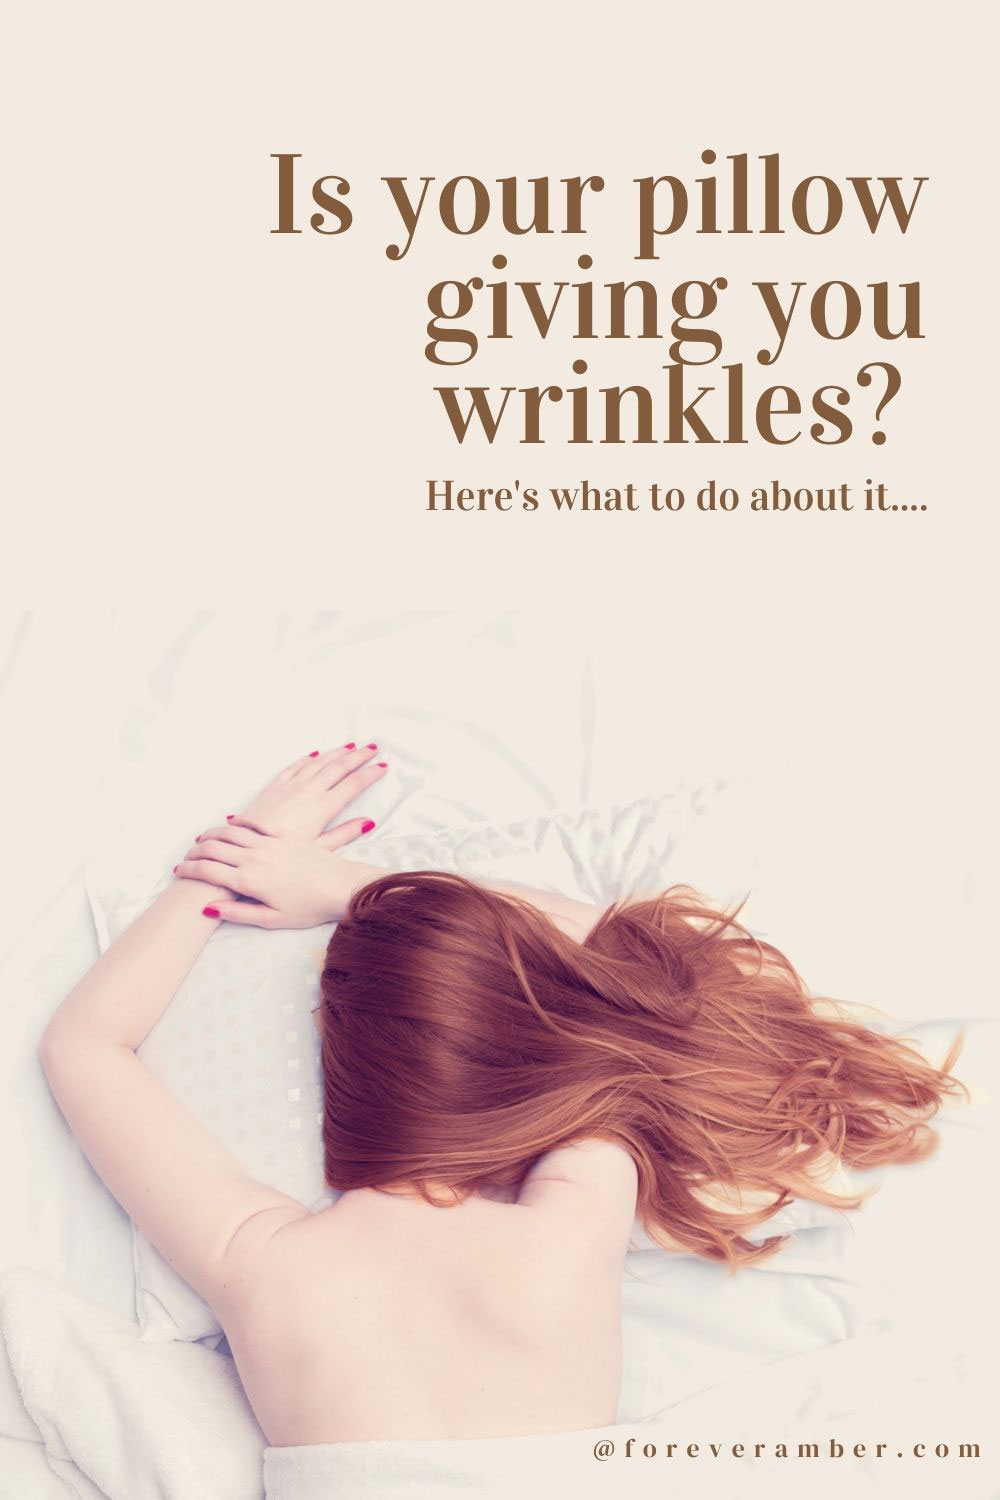 How to prevent sleep lines and pillow wrinkles